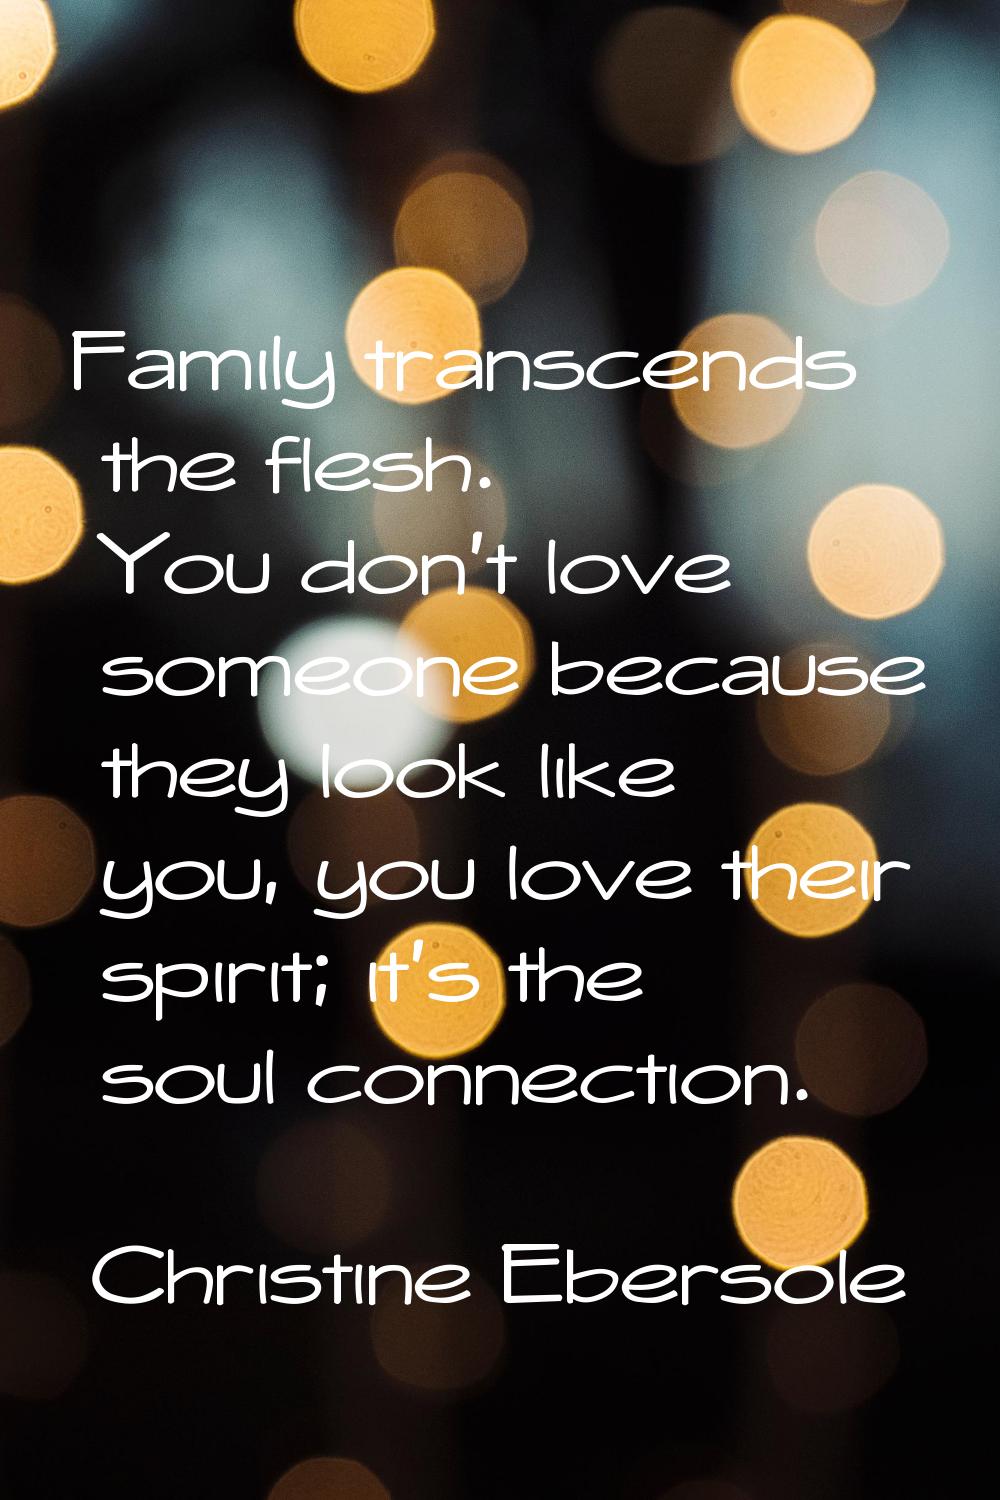 Family transcends the flesh. You don't love someone because they look like you, you love their spir